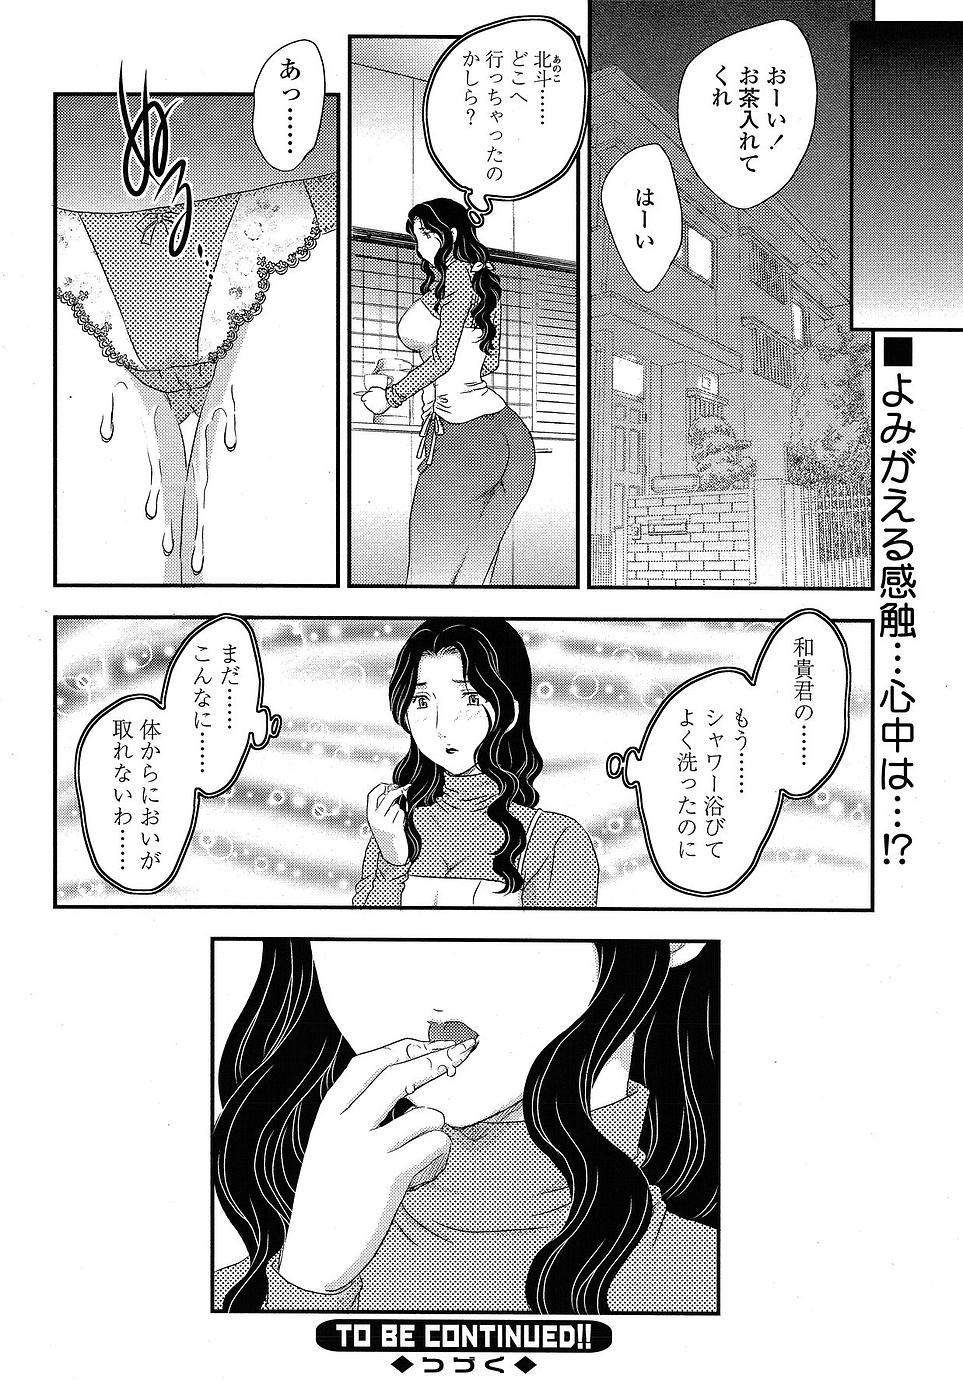 [Hiryuu Ran] MOTHER'S Ch. 1-9 page 49 full